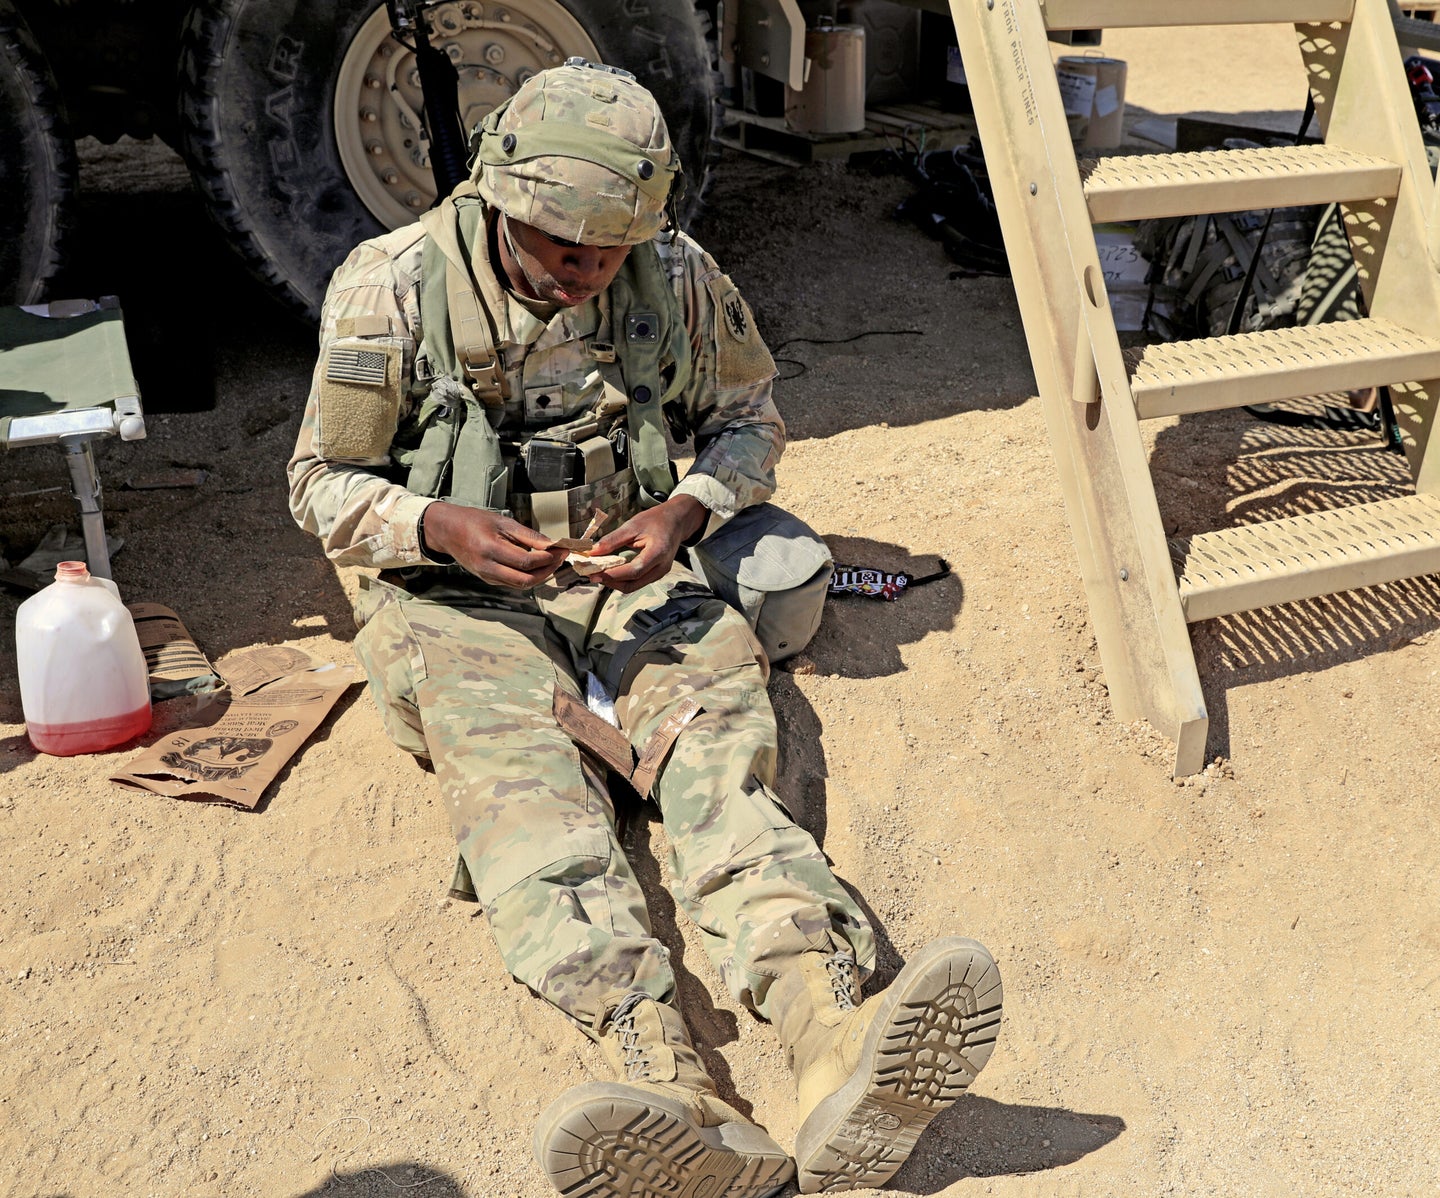 A soldier enjoying an MRE and a much needed break.